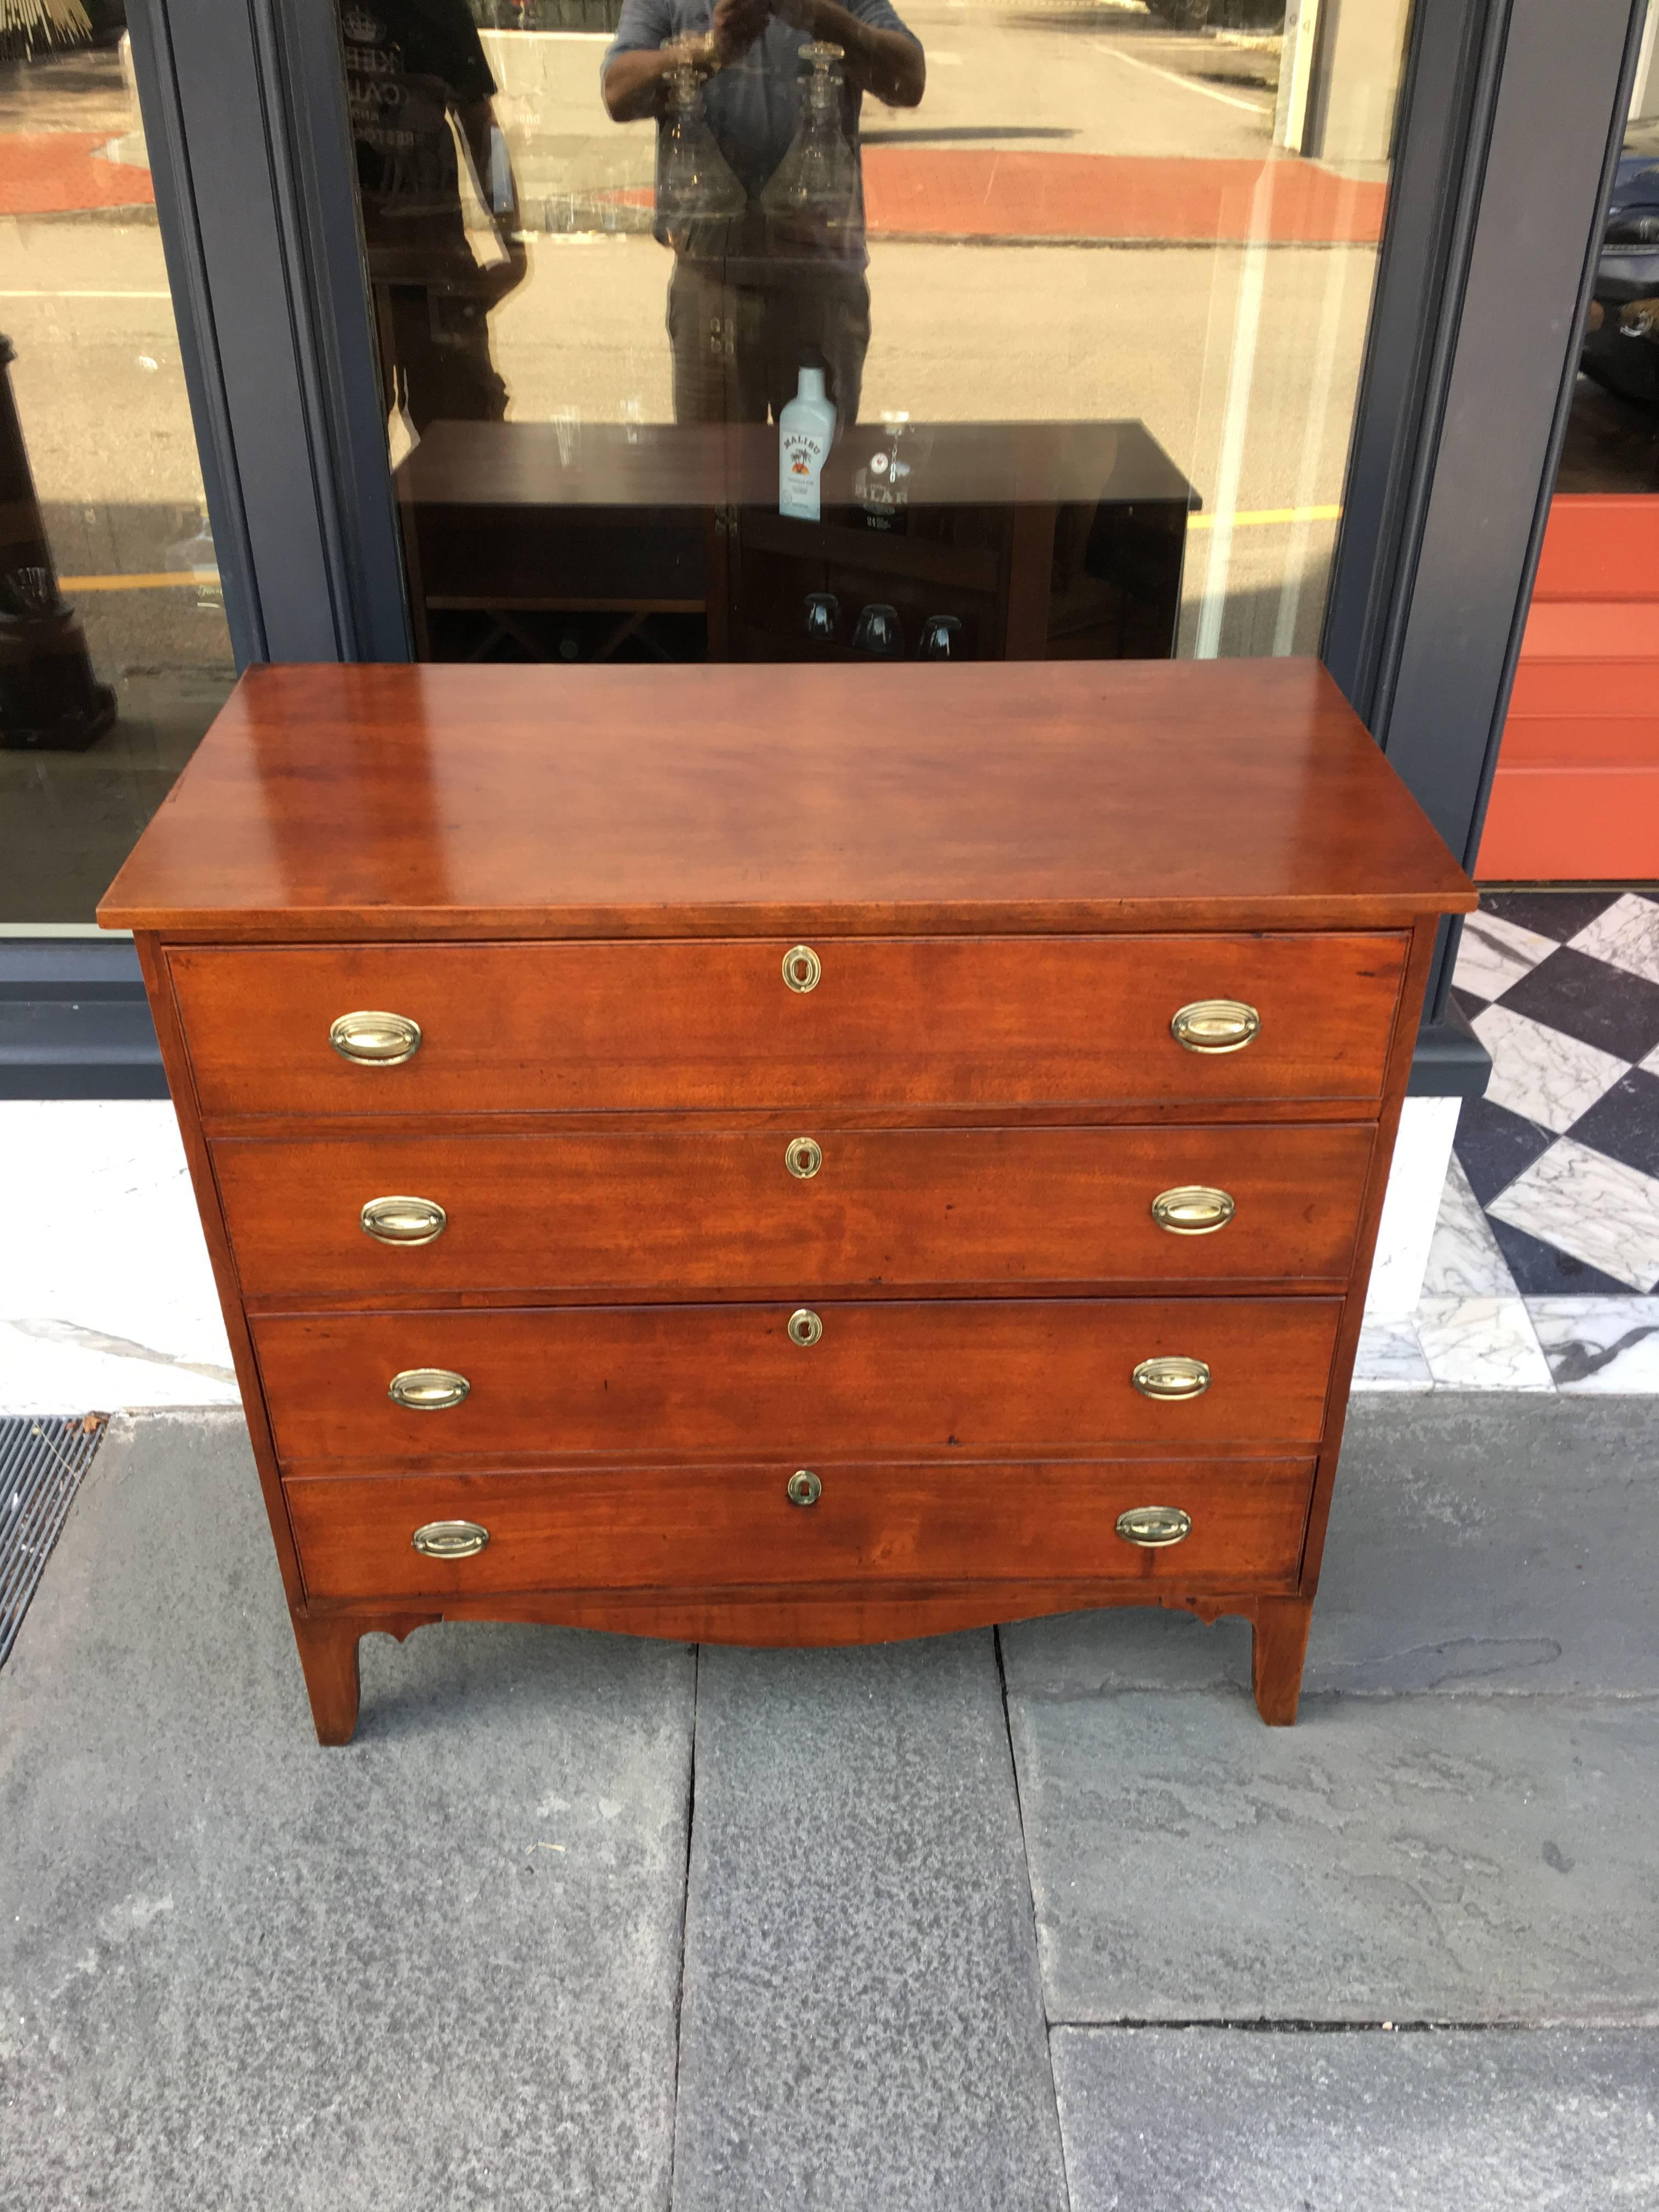 American birch new England chest late 19th century with original pulls.